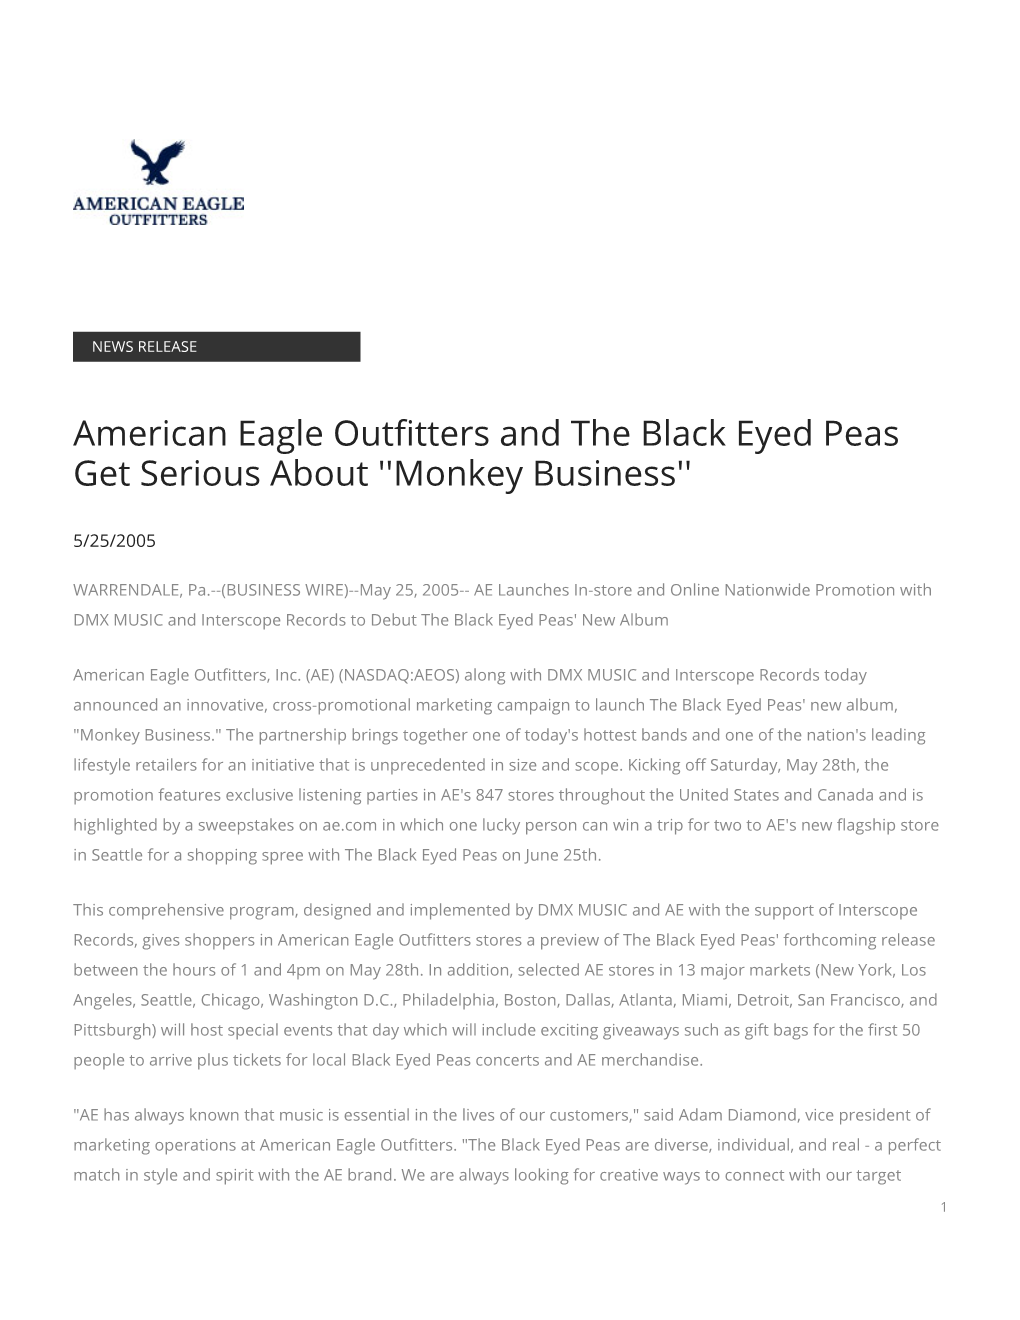 American Eagle Outfitters and the Black Eyed Peas Get Serious About ''Monkey Business''